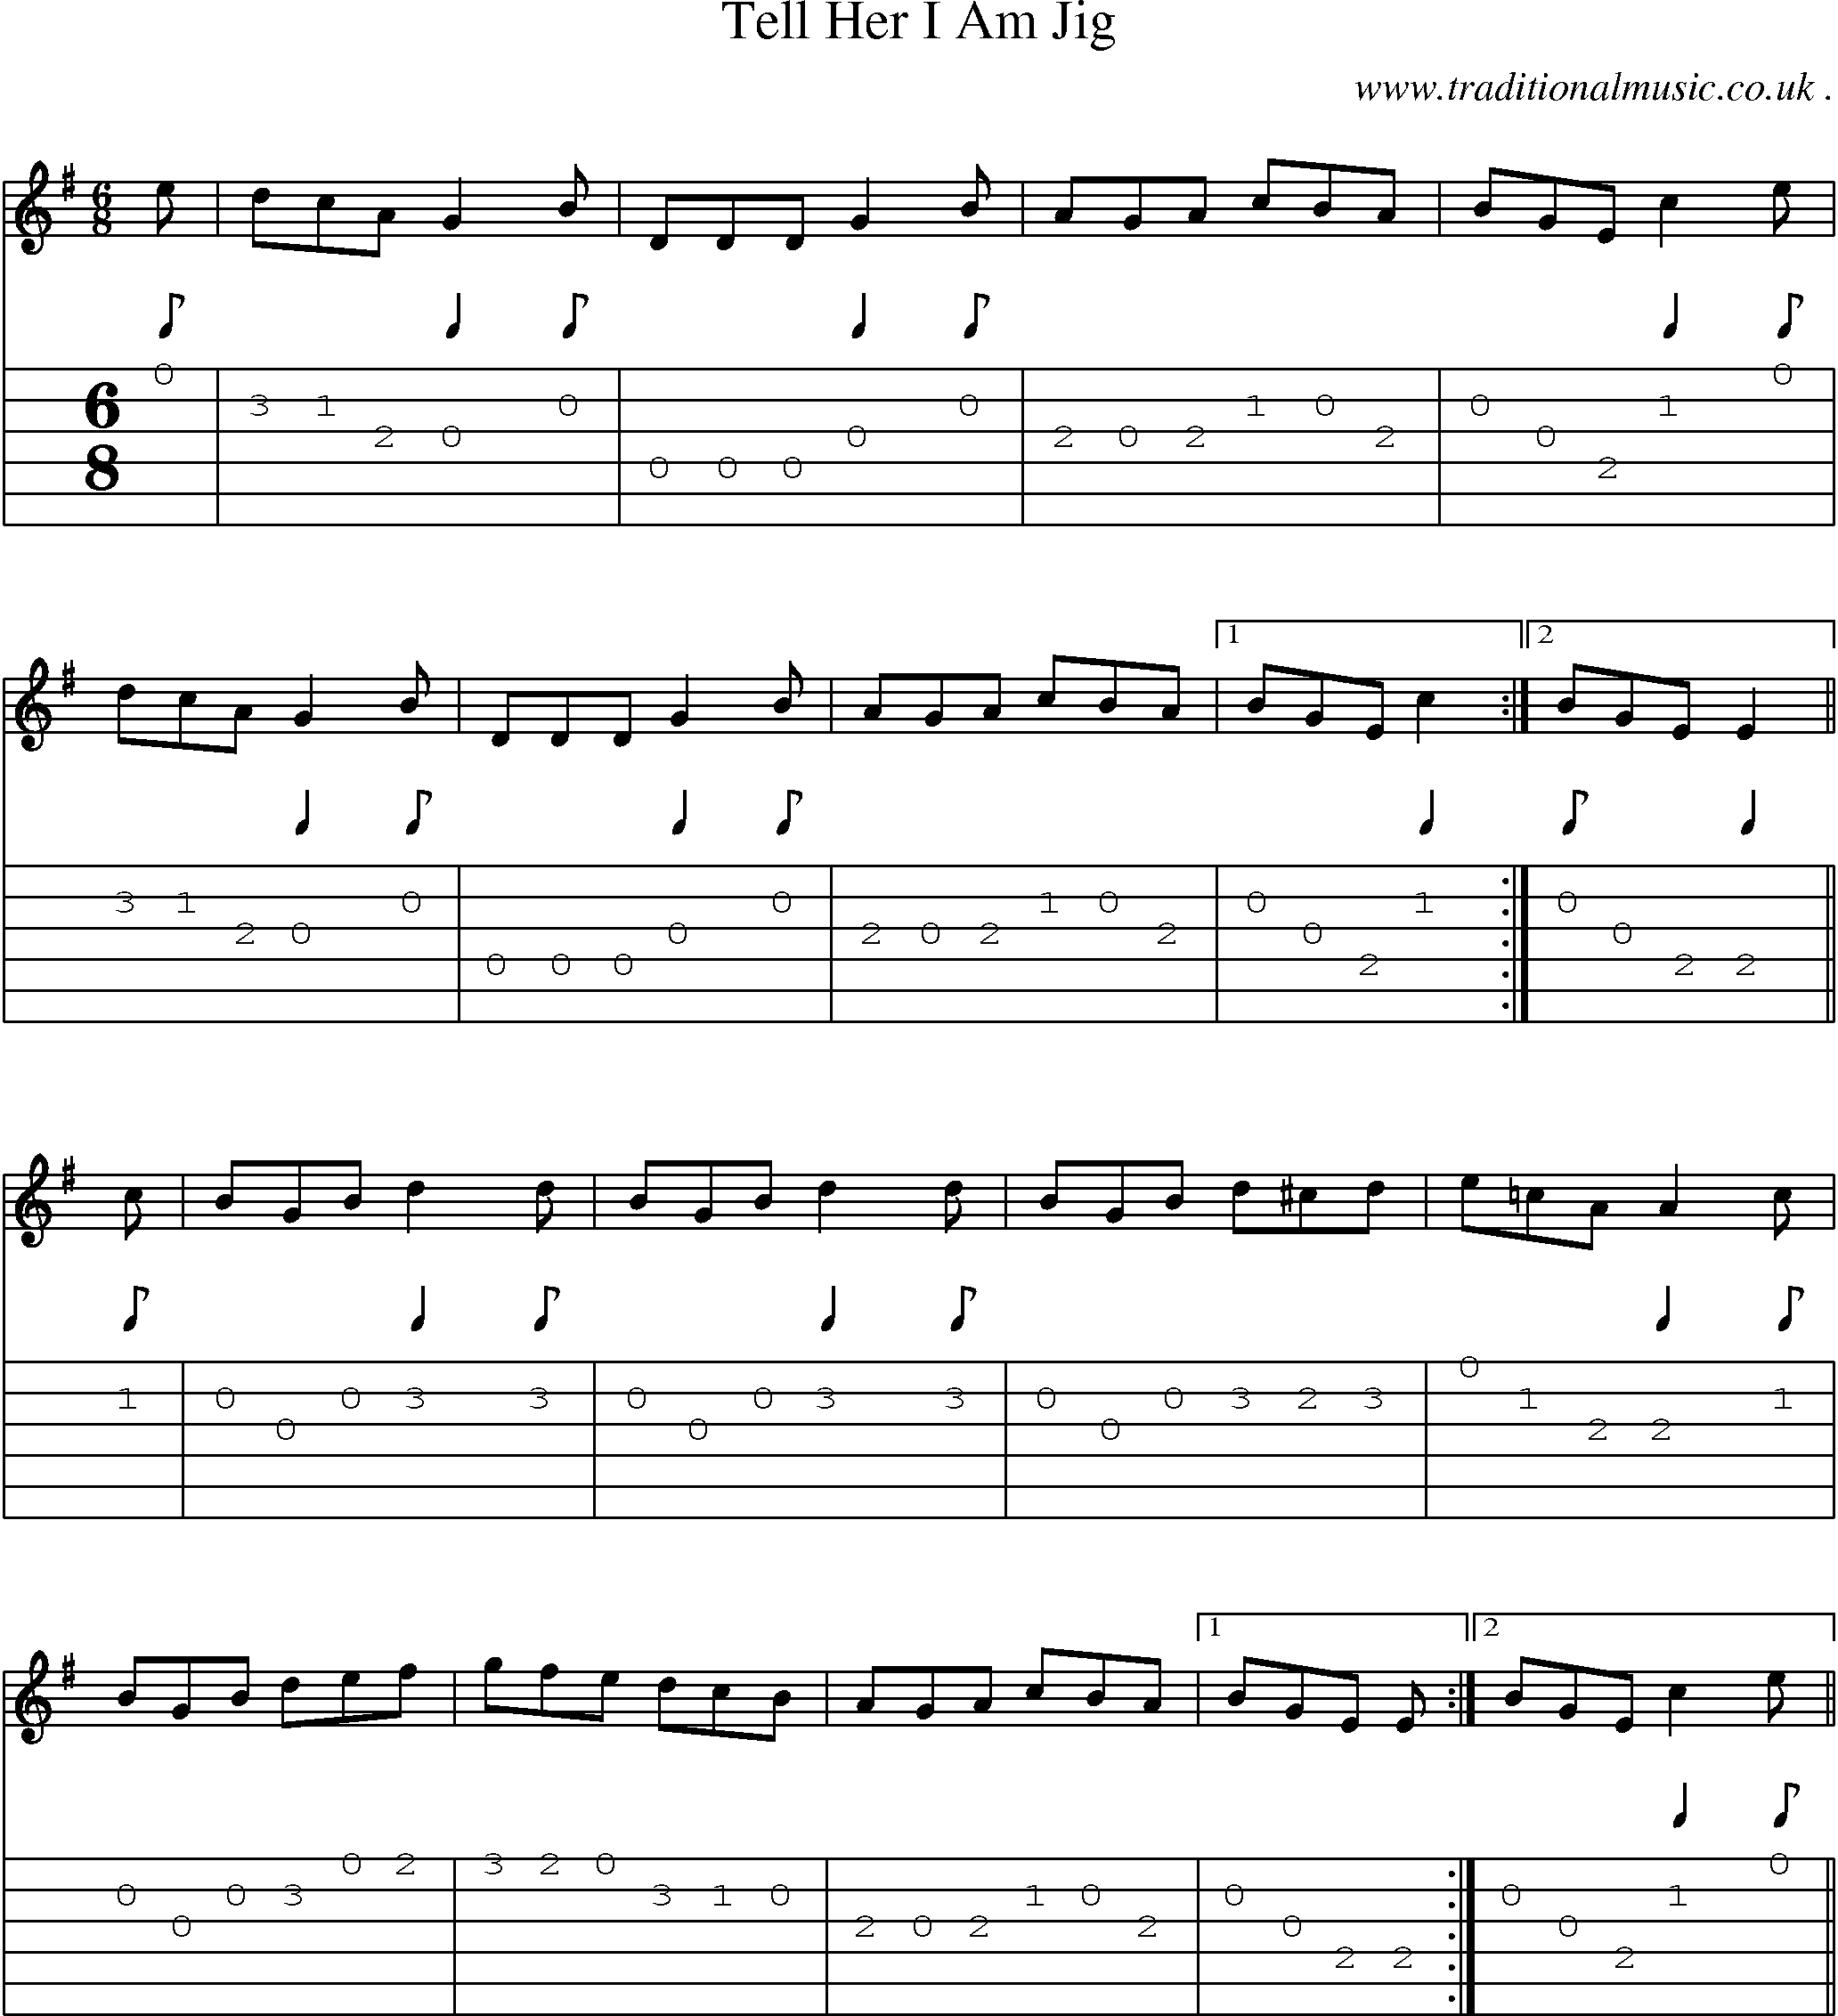 Sheet-Music and Guitar Tabs for Tell Her I Am Jig